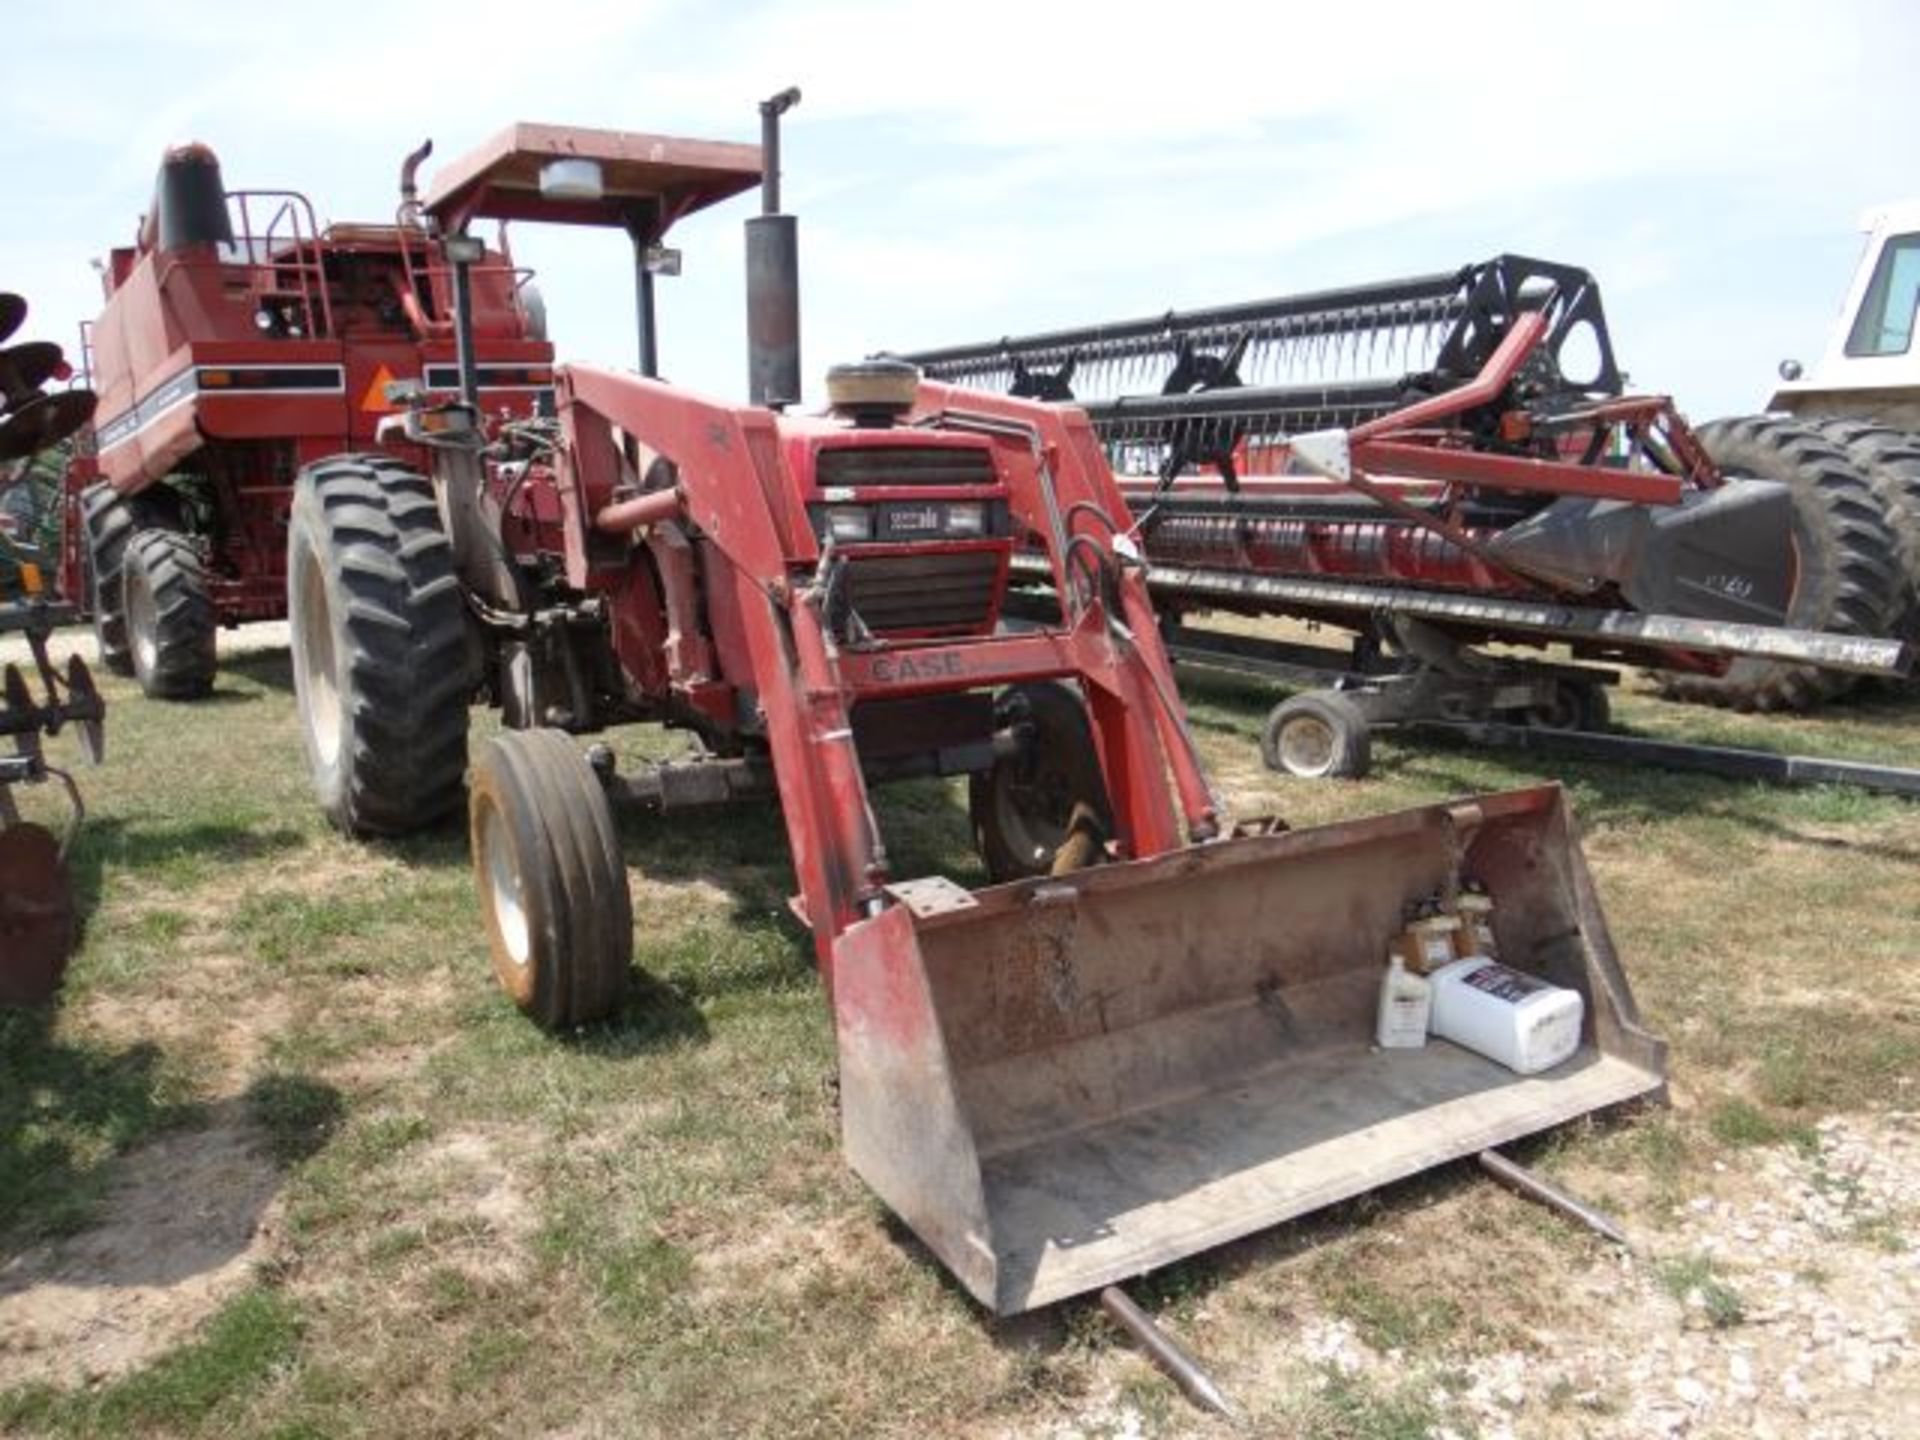 Case IH 1594 Tractor, 1988 w/Case IH 74L Loader, Bucket and Bale Spear, Manual in the Shed - Image 2 of 4